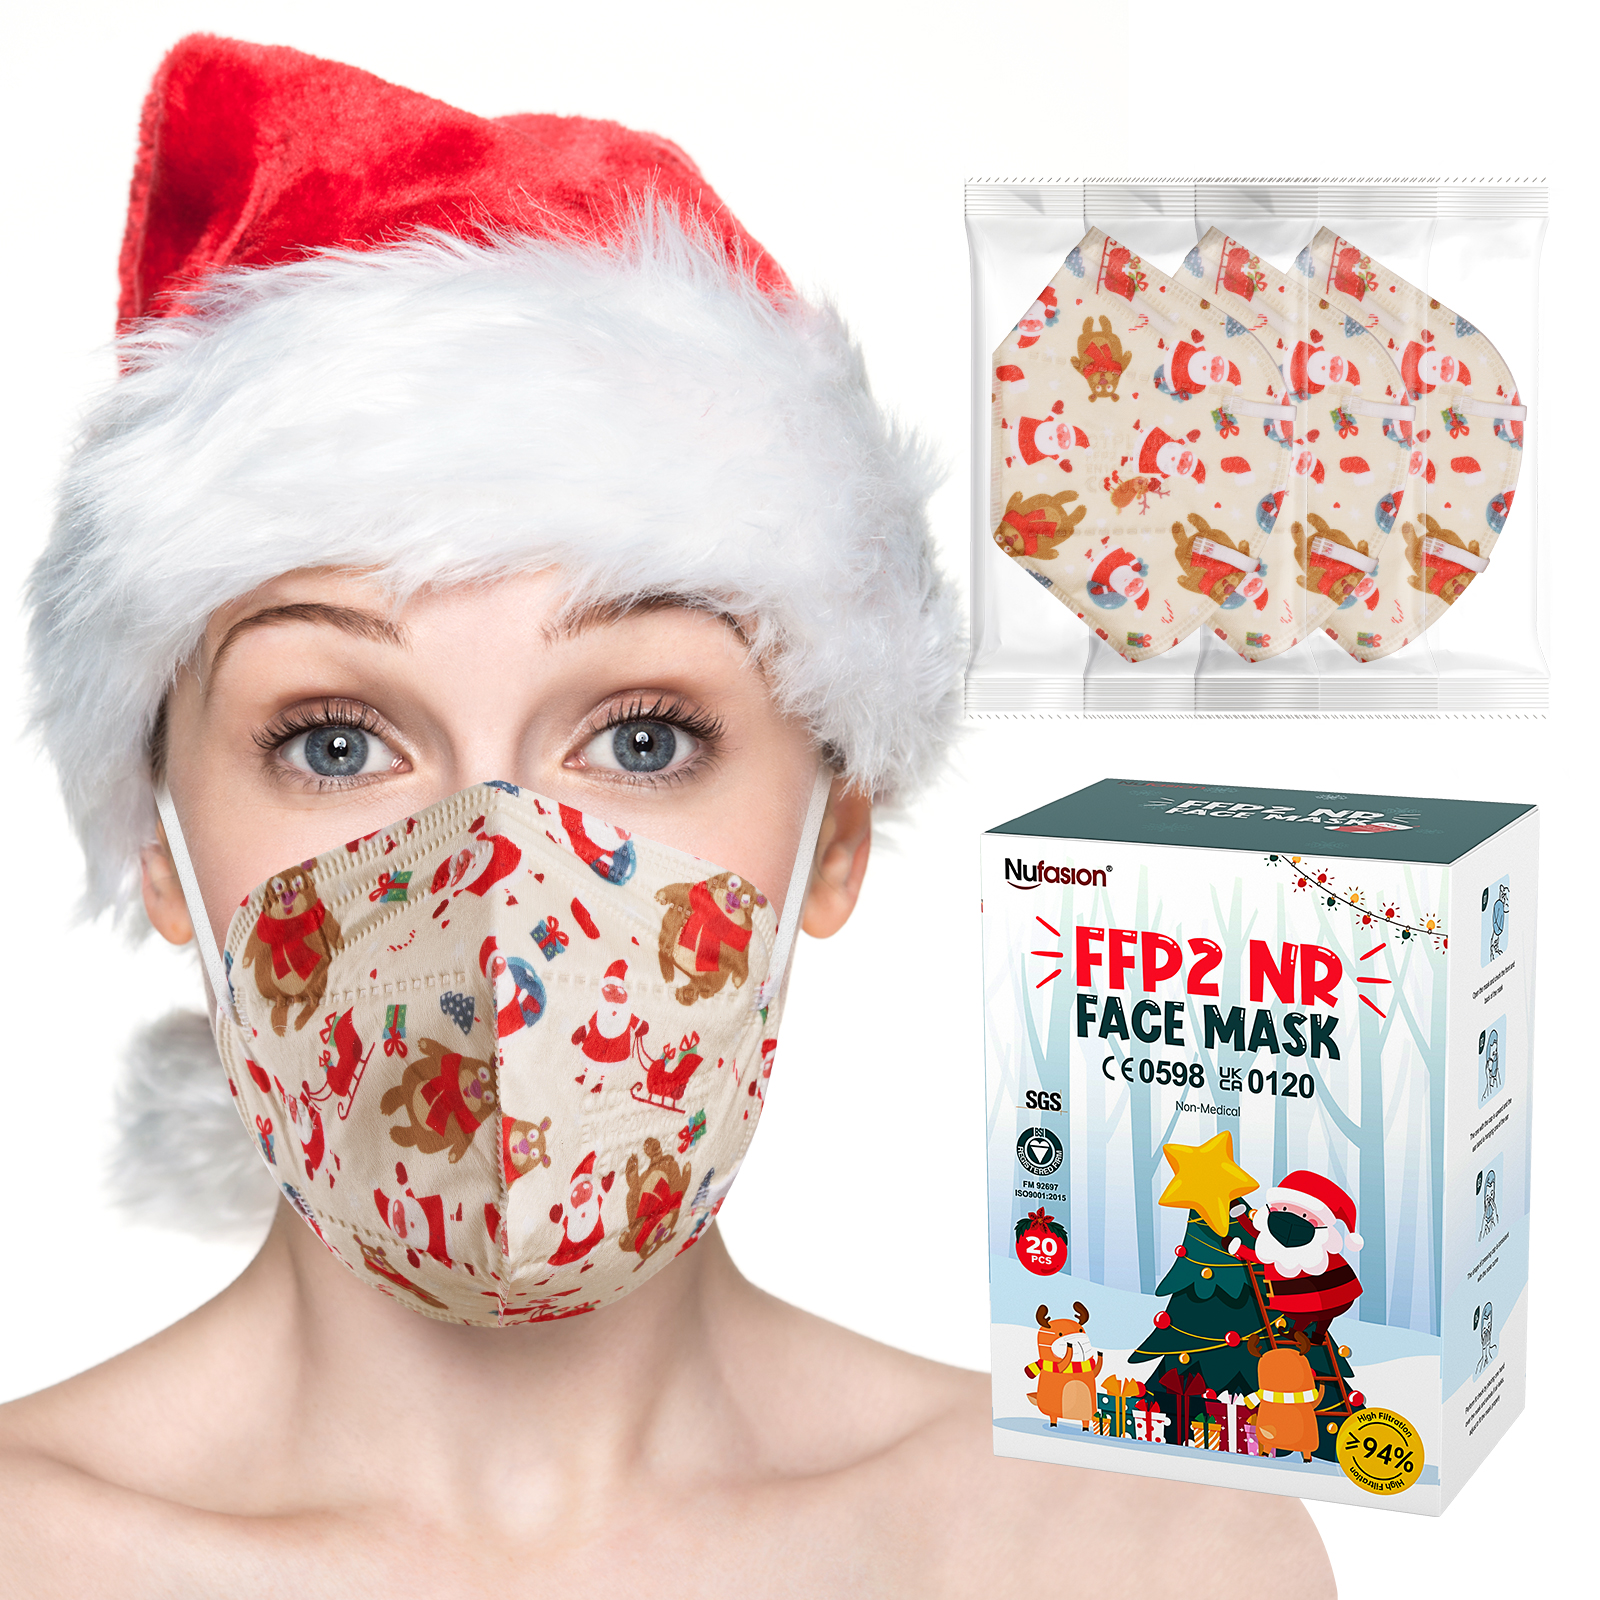 Have you got your face mask ready for Christmas